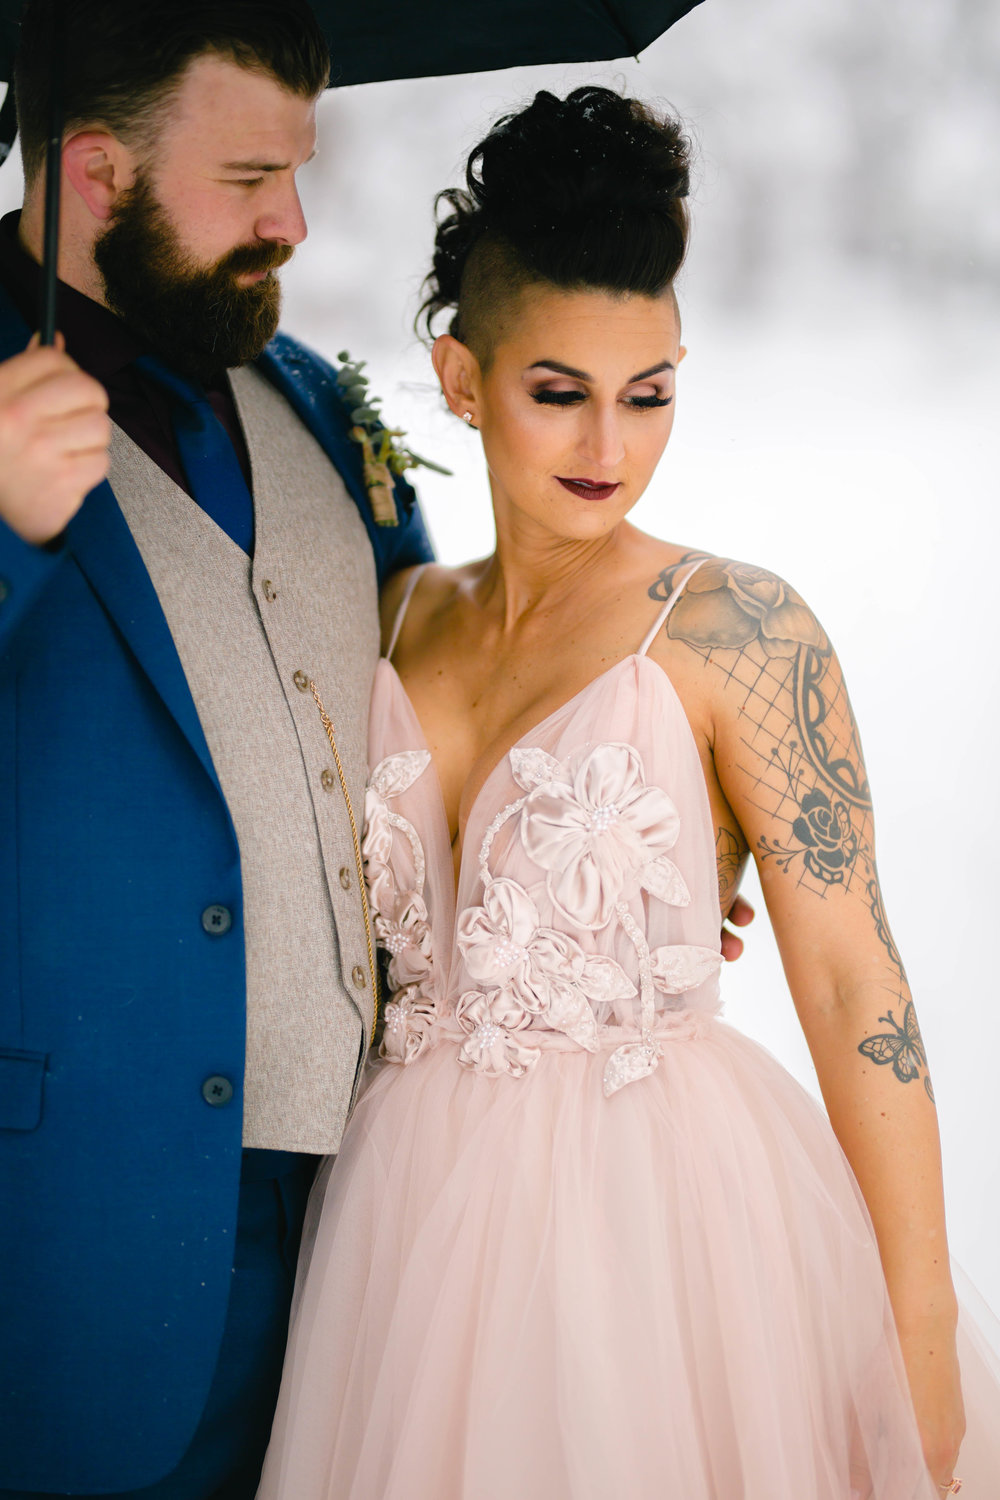 intimate wedding photo of a bride in a blush wedding gown and a groom in a blue suit